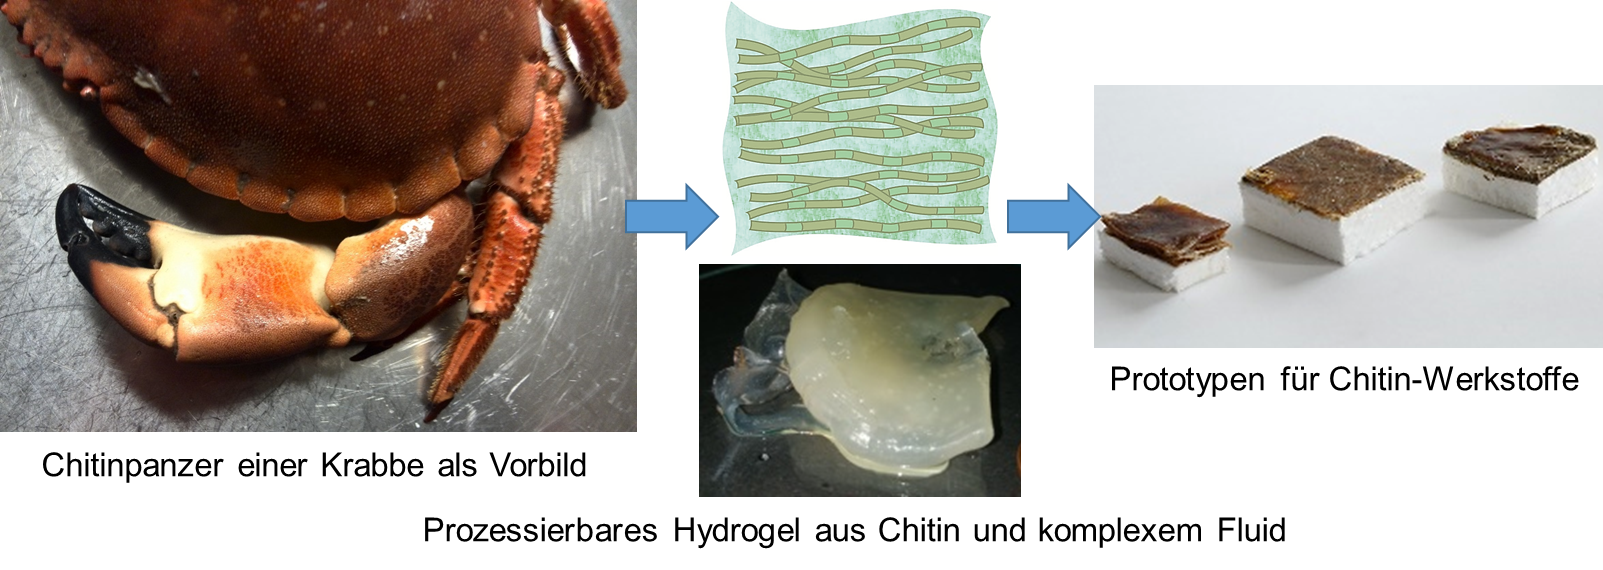 The composite image shows, on the left-hand side, a photo of a crab chitin shell; a graphical representation of crosslinked polymer filaments in the centre of the image; and below, a photo of a whitish-gooey hydrogel. A photo of three prototype chitin materials is shown on the right-hand side. Here, dark chitin layers lie on small, rectangular, white blocks of carrier material. All three parts of the image (left, centre, right) are connected by blue arrows (from left to right).